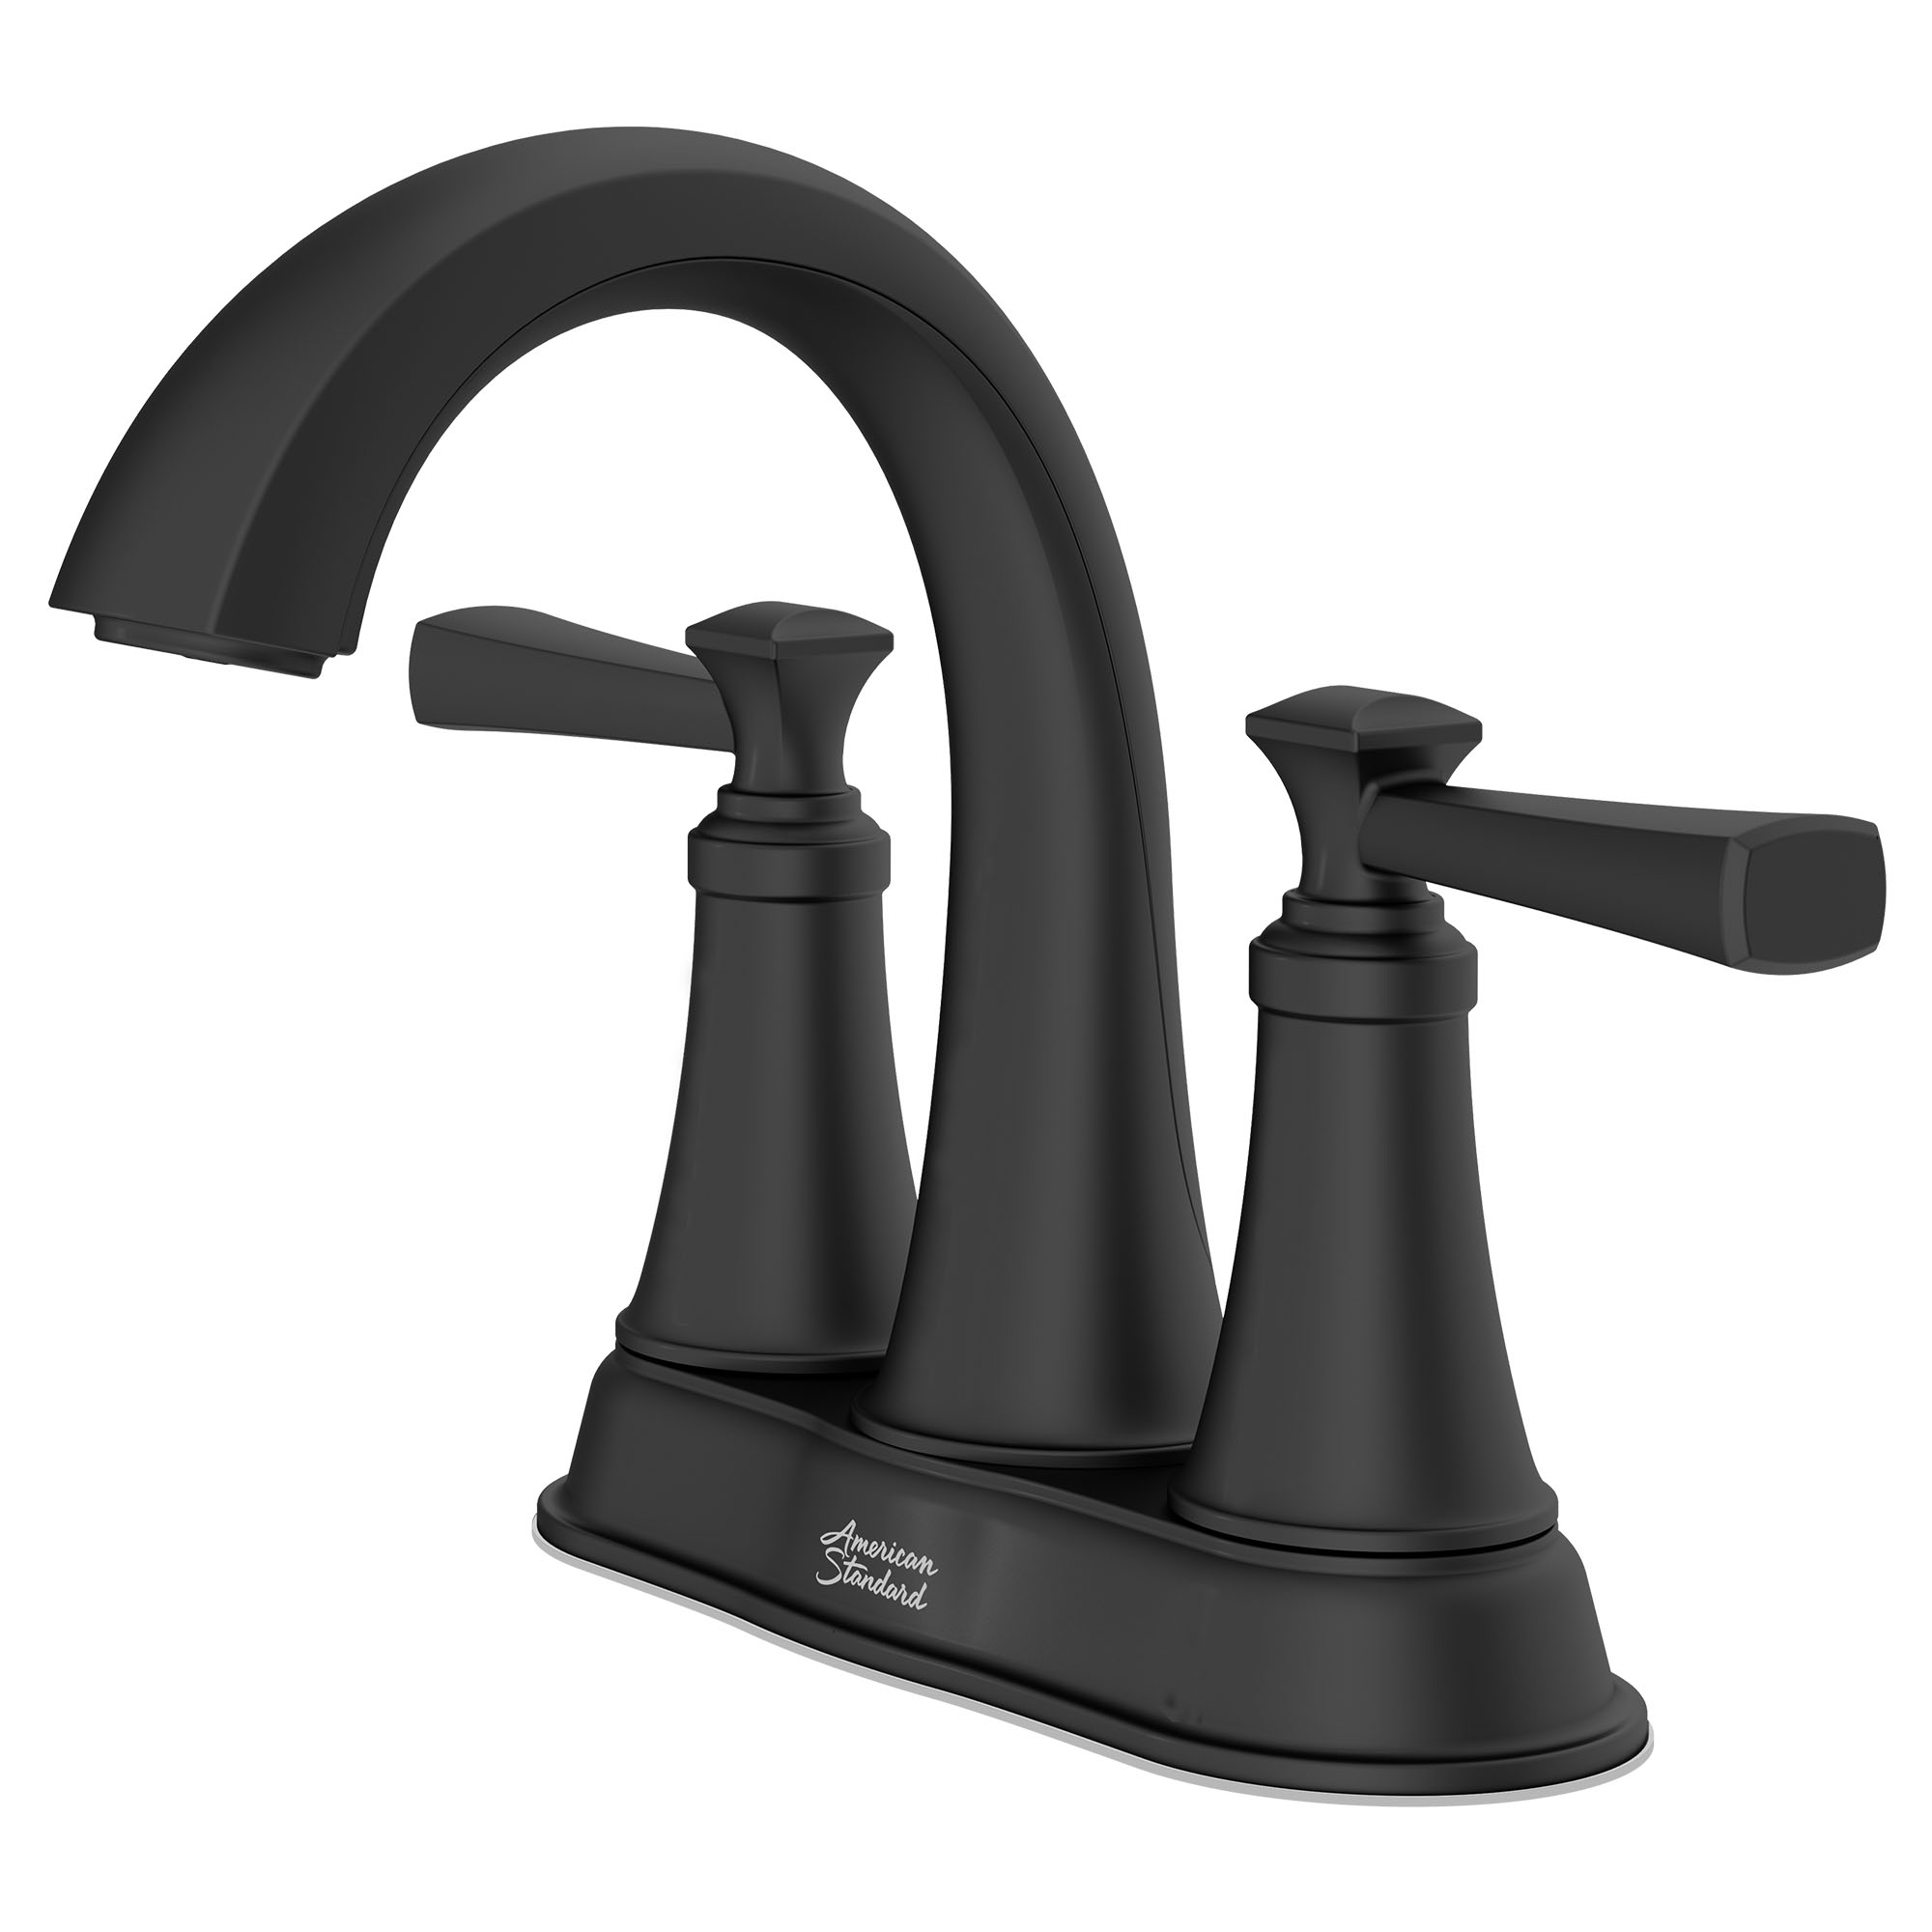 Rumson® 4-Inch Centerset 2-Handle Bathroom Faucet 1.2 gpm/4.5 L/min With Lever Handles